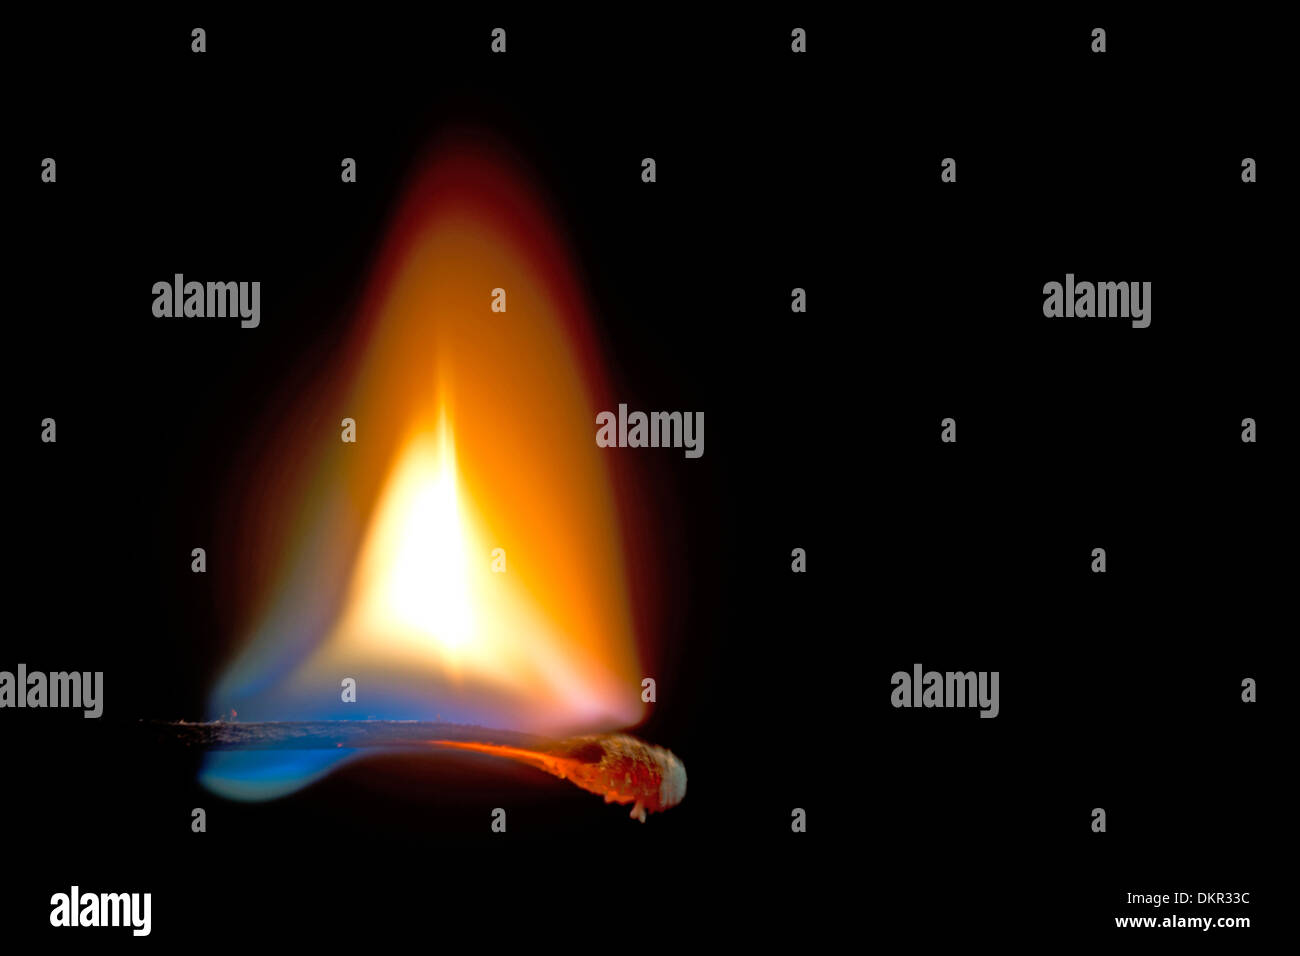 light, kindle, burn, detail, individually, fires, flame, glow, heat, close-up, match, warmth, hot, Stock Photo